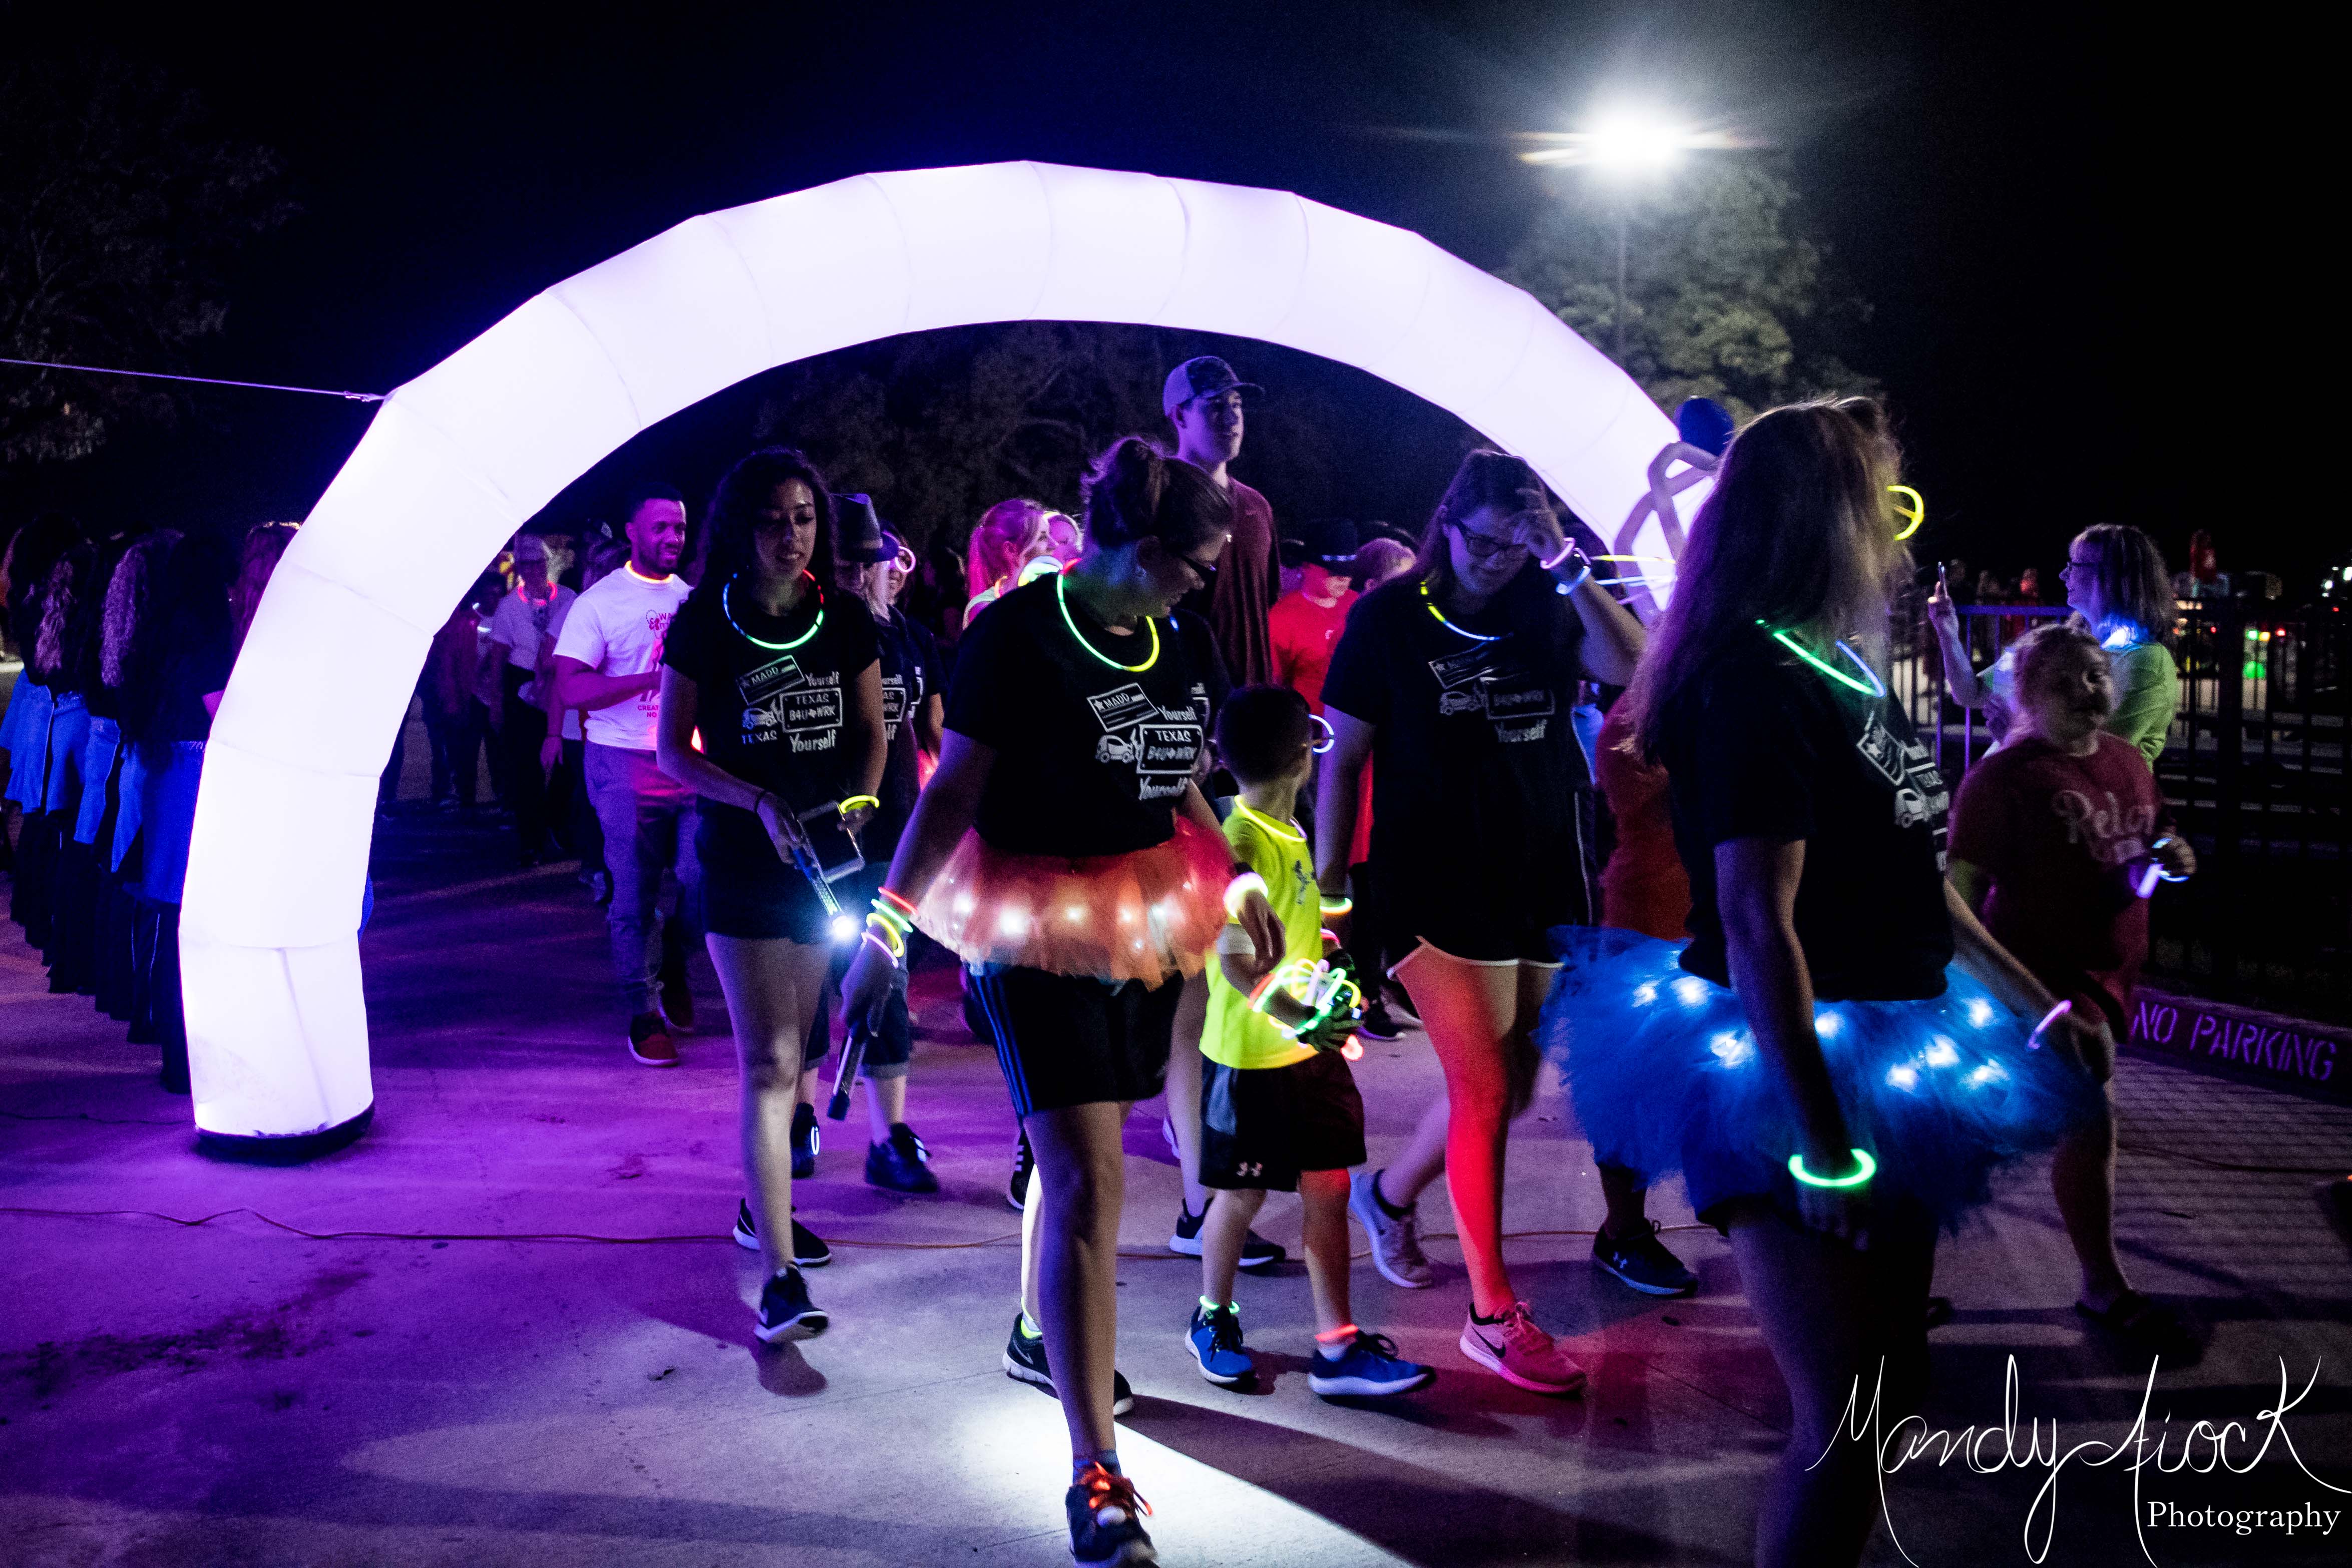 Photos from Last Weekend’s 7th Annual Walk Like MADD Event by Mandy Fiock Photography